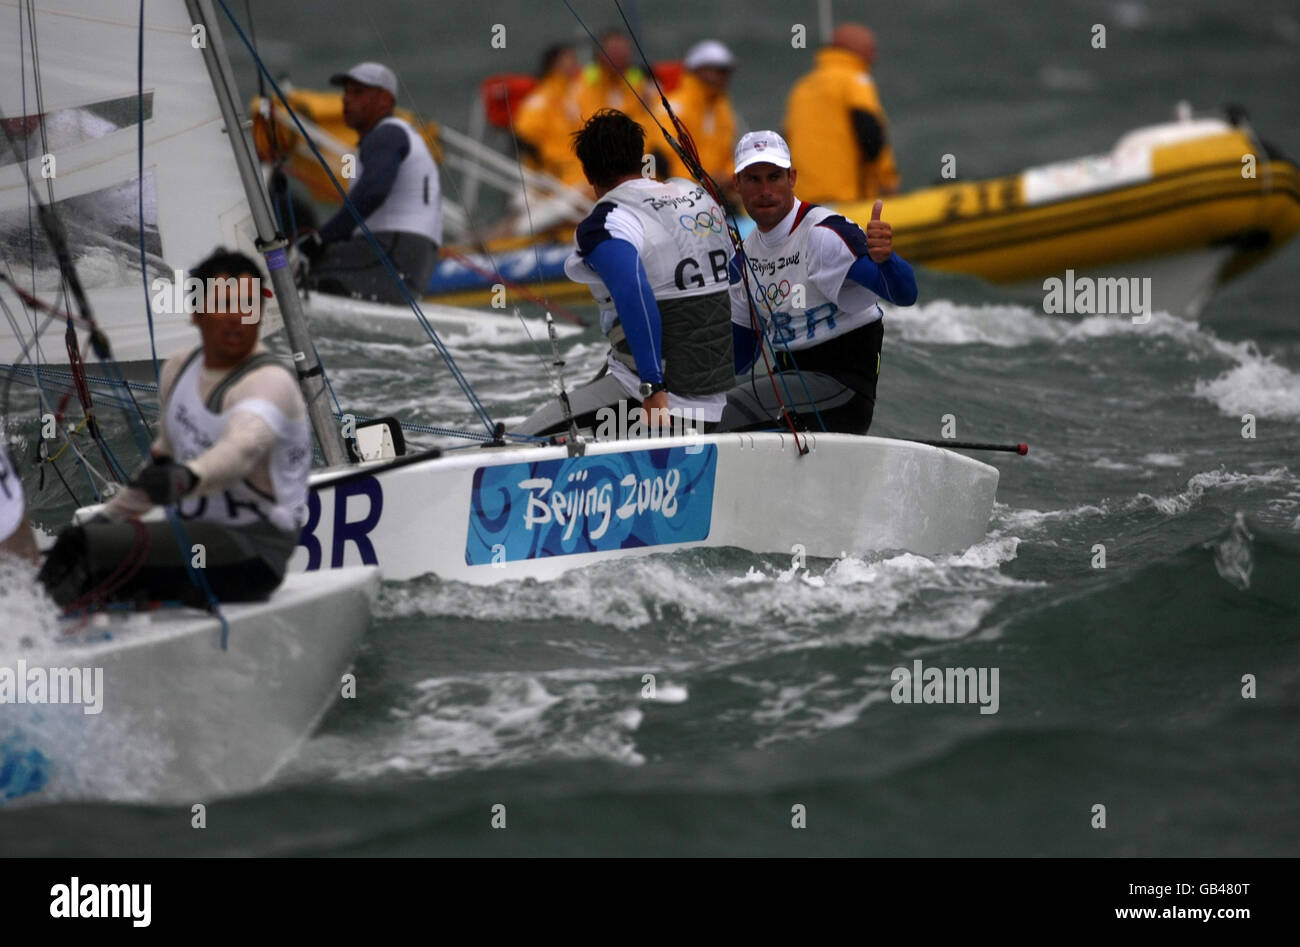 Great Britain's duo of Iain Percy and Andrew Simpson signal their Gold Medal success in the Star class at the 2008 Beijing Olympic Games Sailing Centre in Qingdao, China. Stock Photo